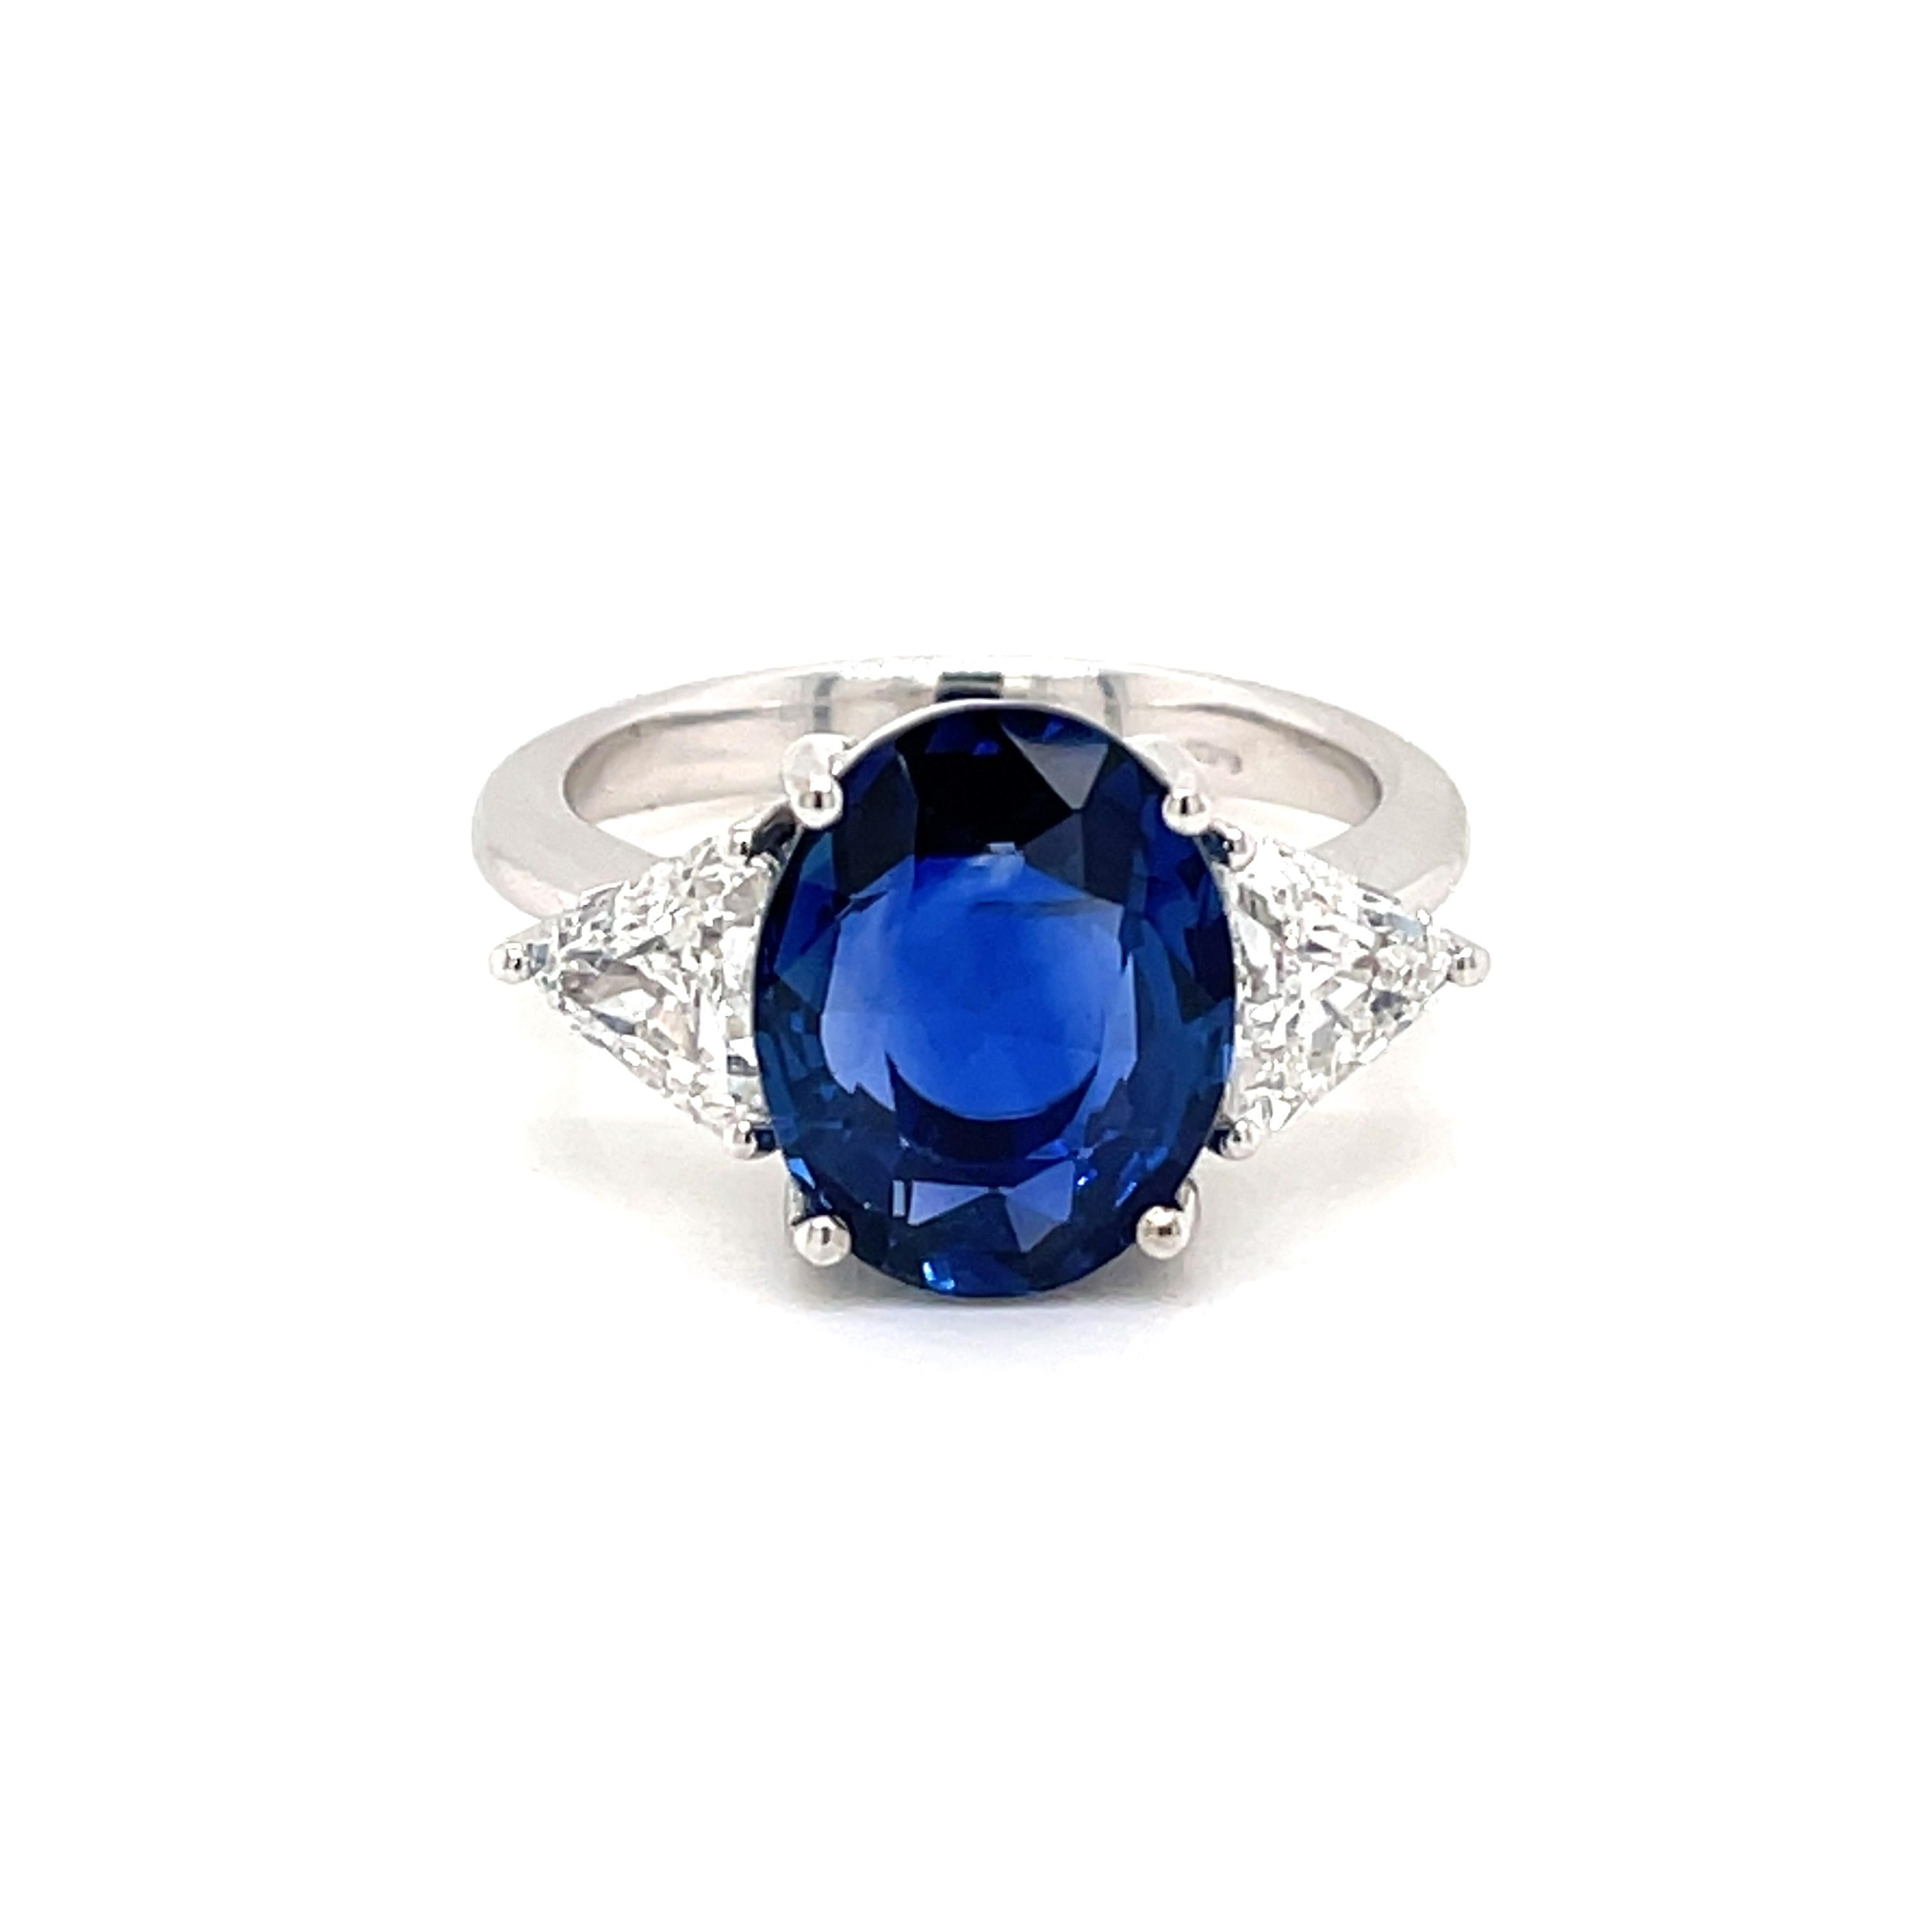 A fine and impressive 18k white Gold, Blue Sapphire and Diamond cluster Ring, set in the center with an oval-cut Natural Sapphire weighing 5,98 carats, Burma estimated origin.
The gemstone features vivid color saturation and medium to dark tone with